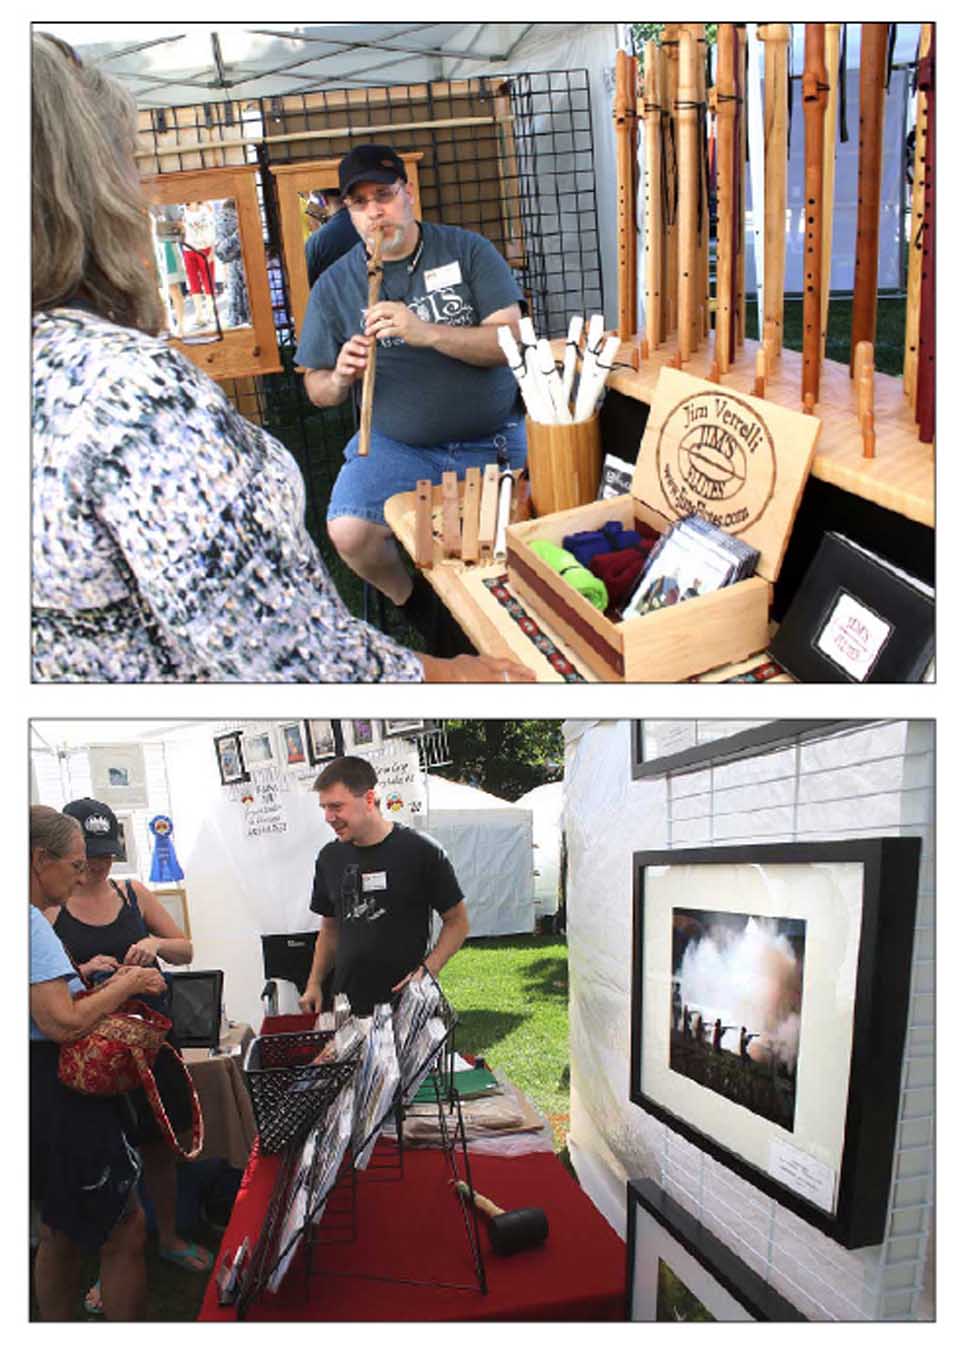 You couldn't turn around at the 22nd annual Colorscape Chenango Arts Festival today without running into someone from Otsego County, be they Alan and Lynne Sessions of Oneonta to Richard Duncan and Pam Welch of Arnold's Lake. That includes such vendors as Jim Verrillii of Jim's Flute, Oneonta, in top photo, and Kevin Gray, the Cherry Valley photographer, in the bottom one. Kevin's photo, at right, is of the 150th reenactment of the Battle of Gettysburg. The annual arts show, on Norwich's central square, attracted more than 170 craftspeople this year. (Jim Kevlin/AllOTSEGO.com)